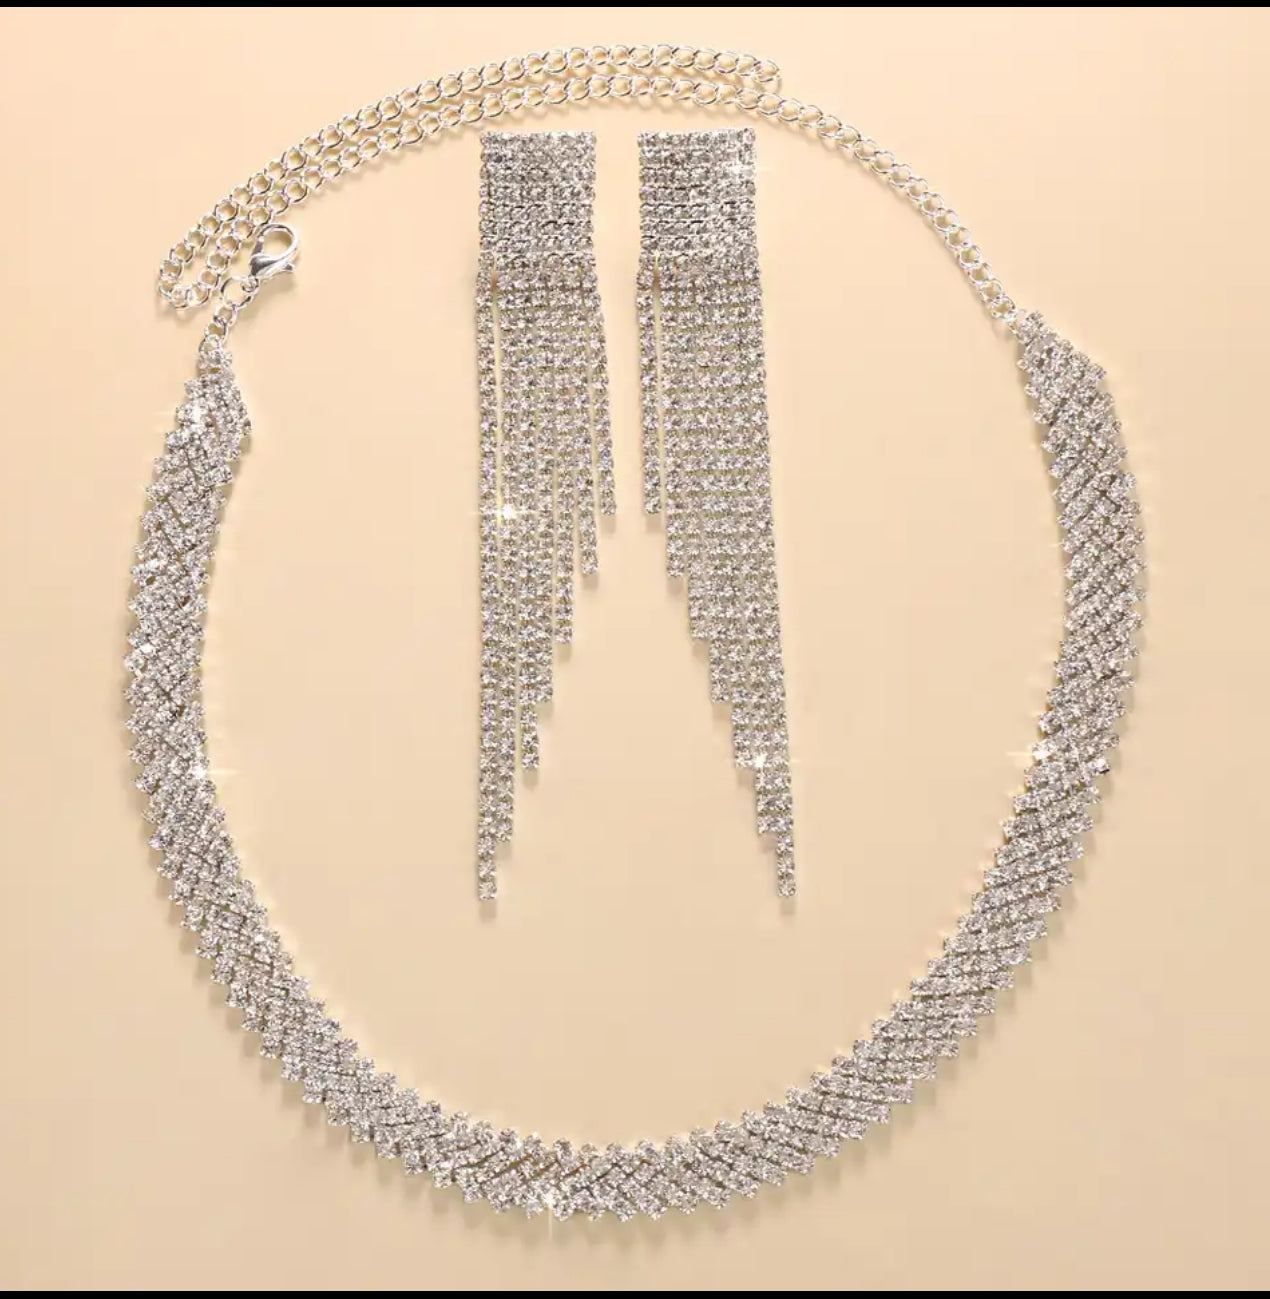 Step-Style Rhinestone Earring and Necklace Set